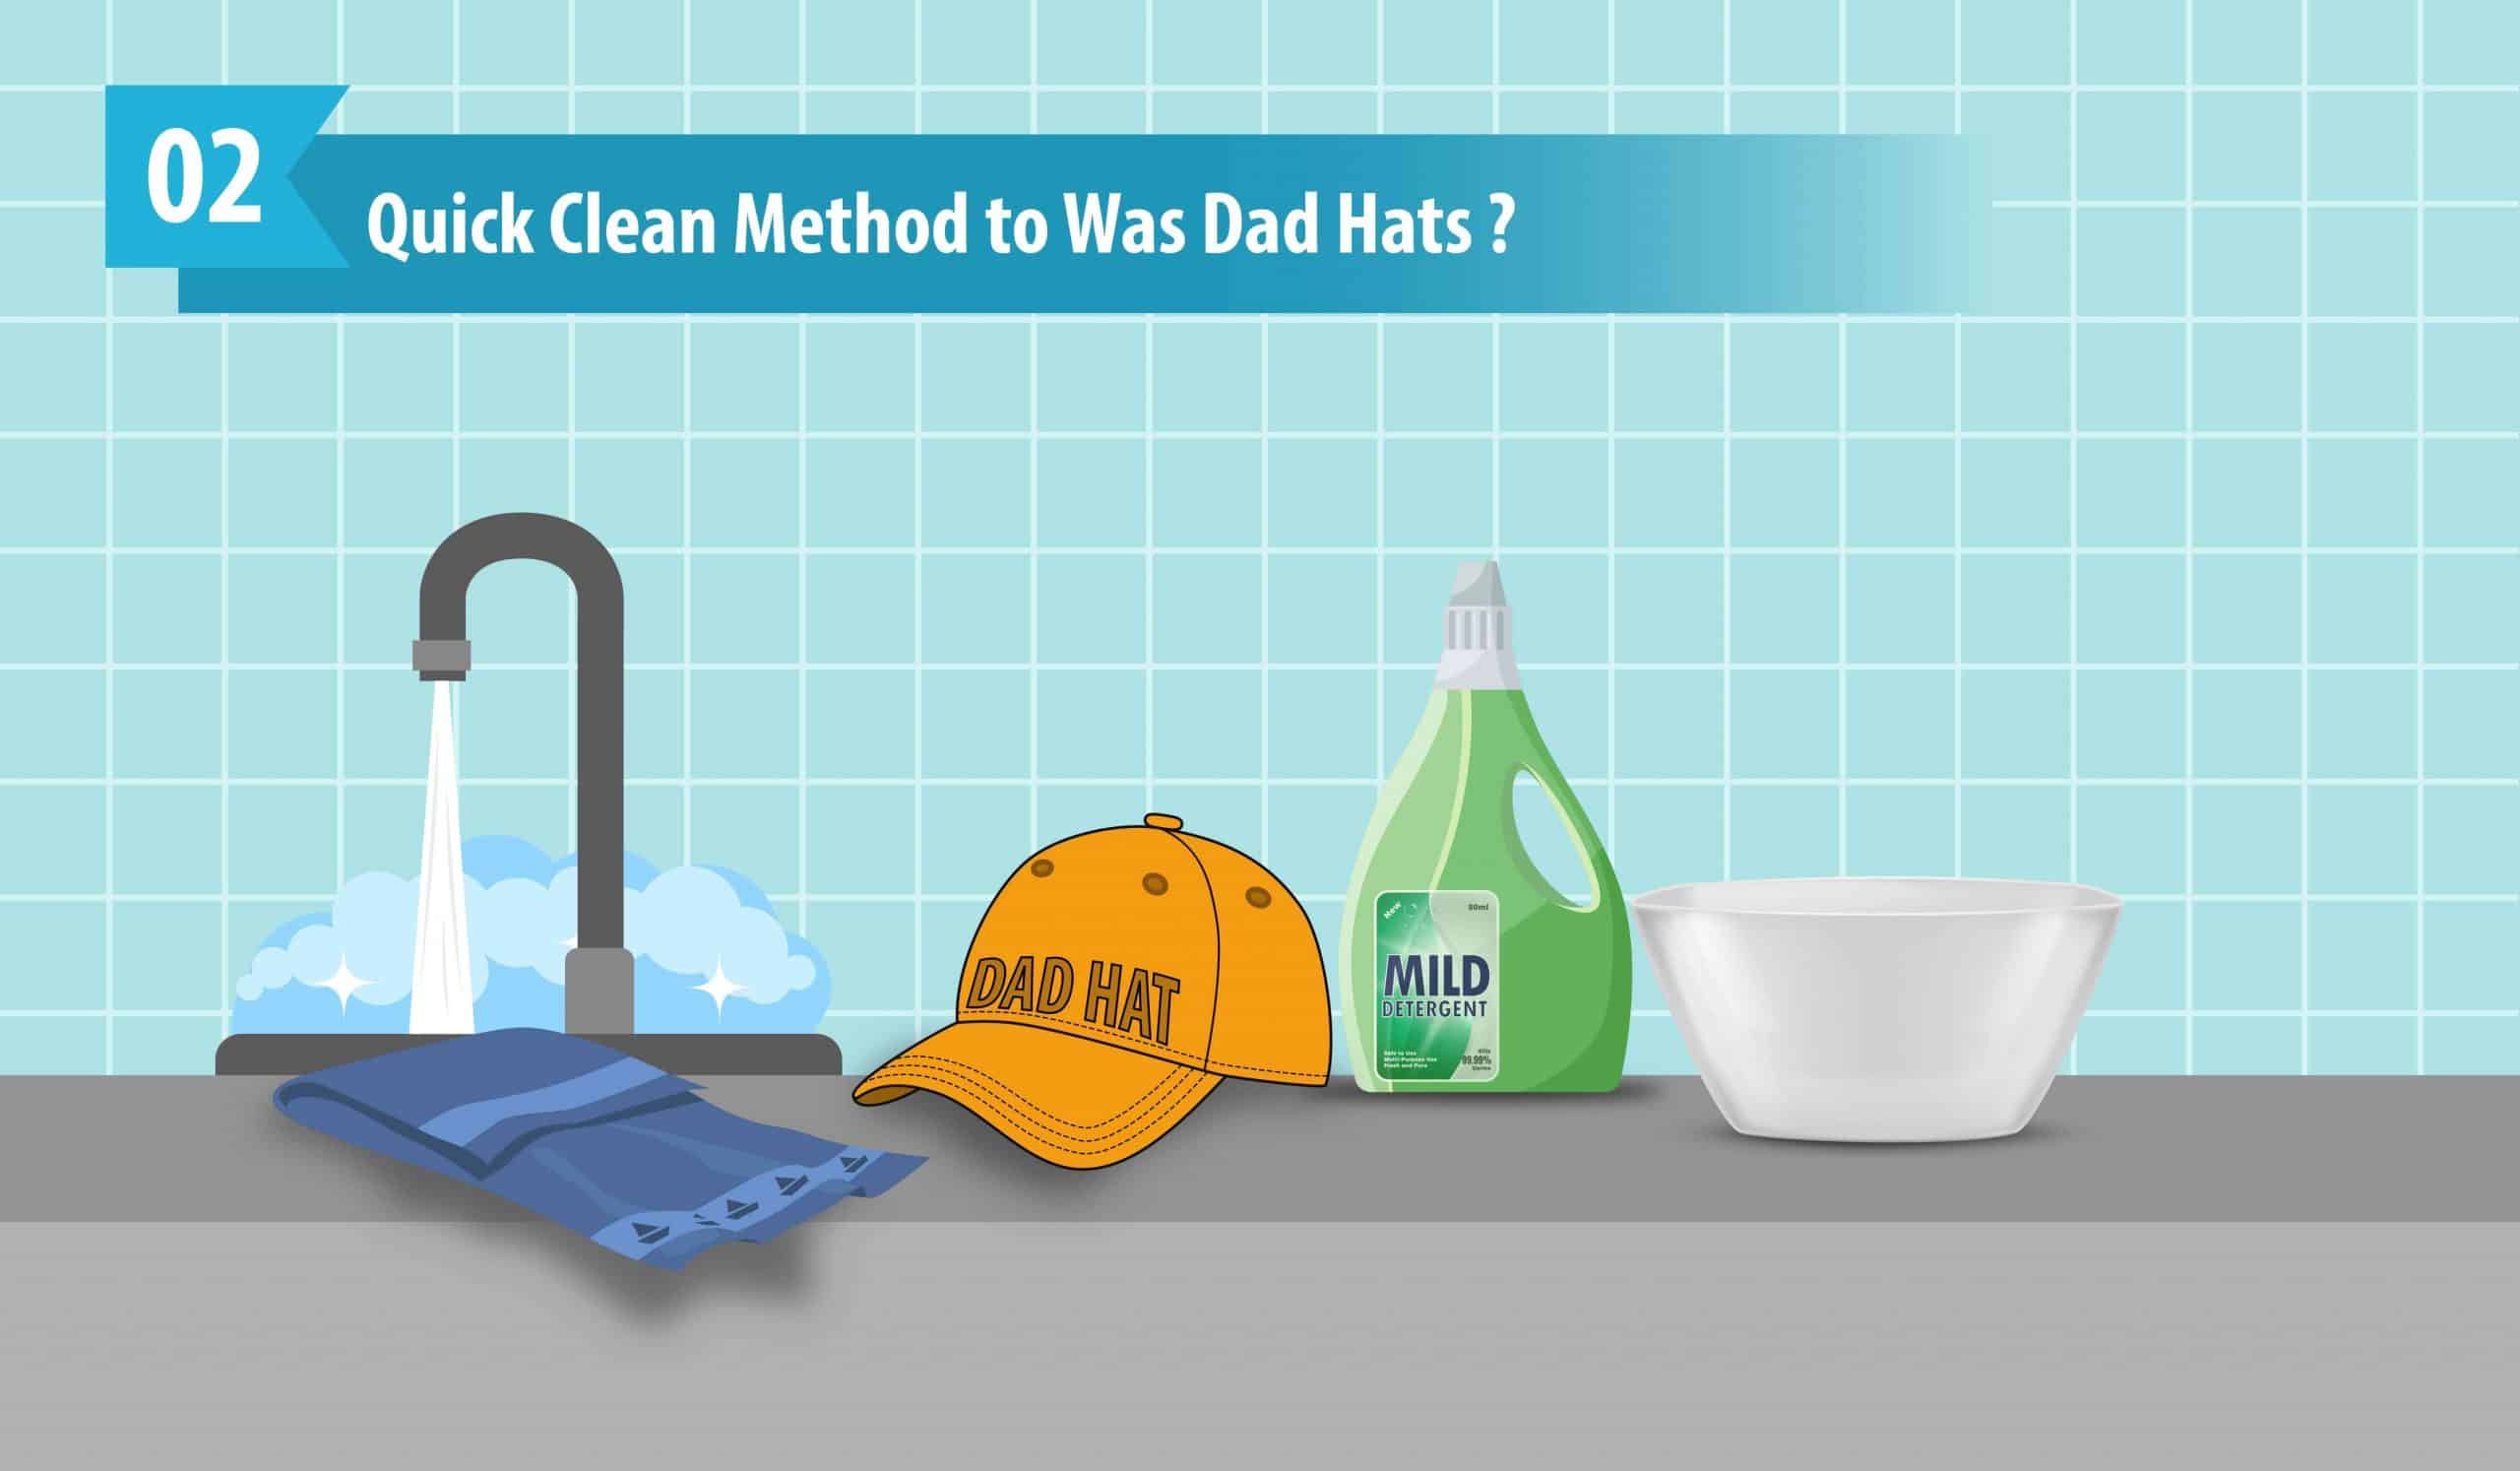 Quick Clean Method to Was Dad Hats